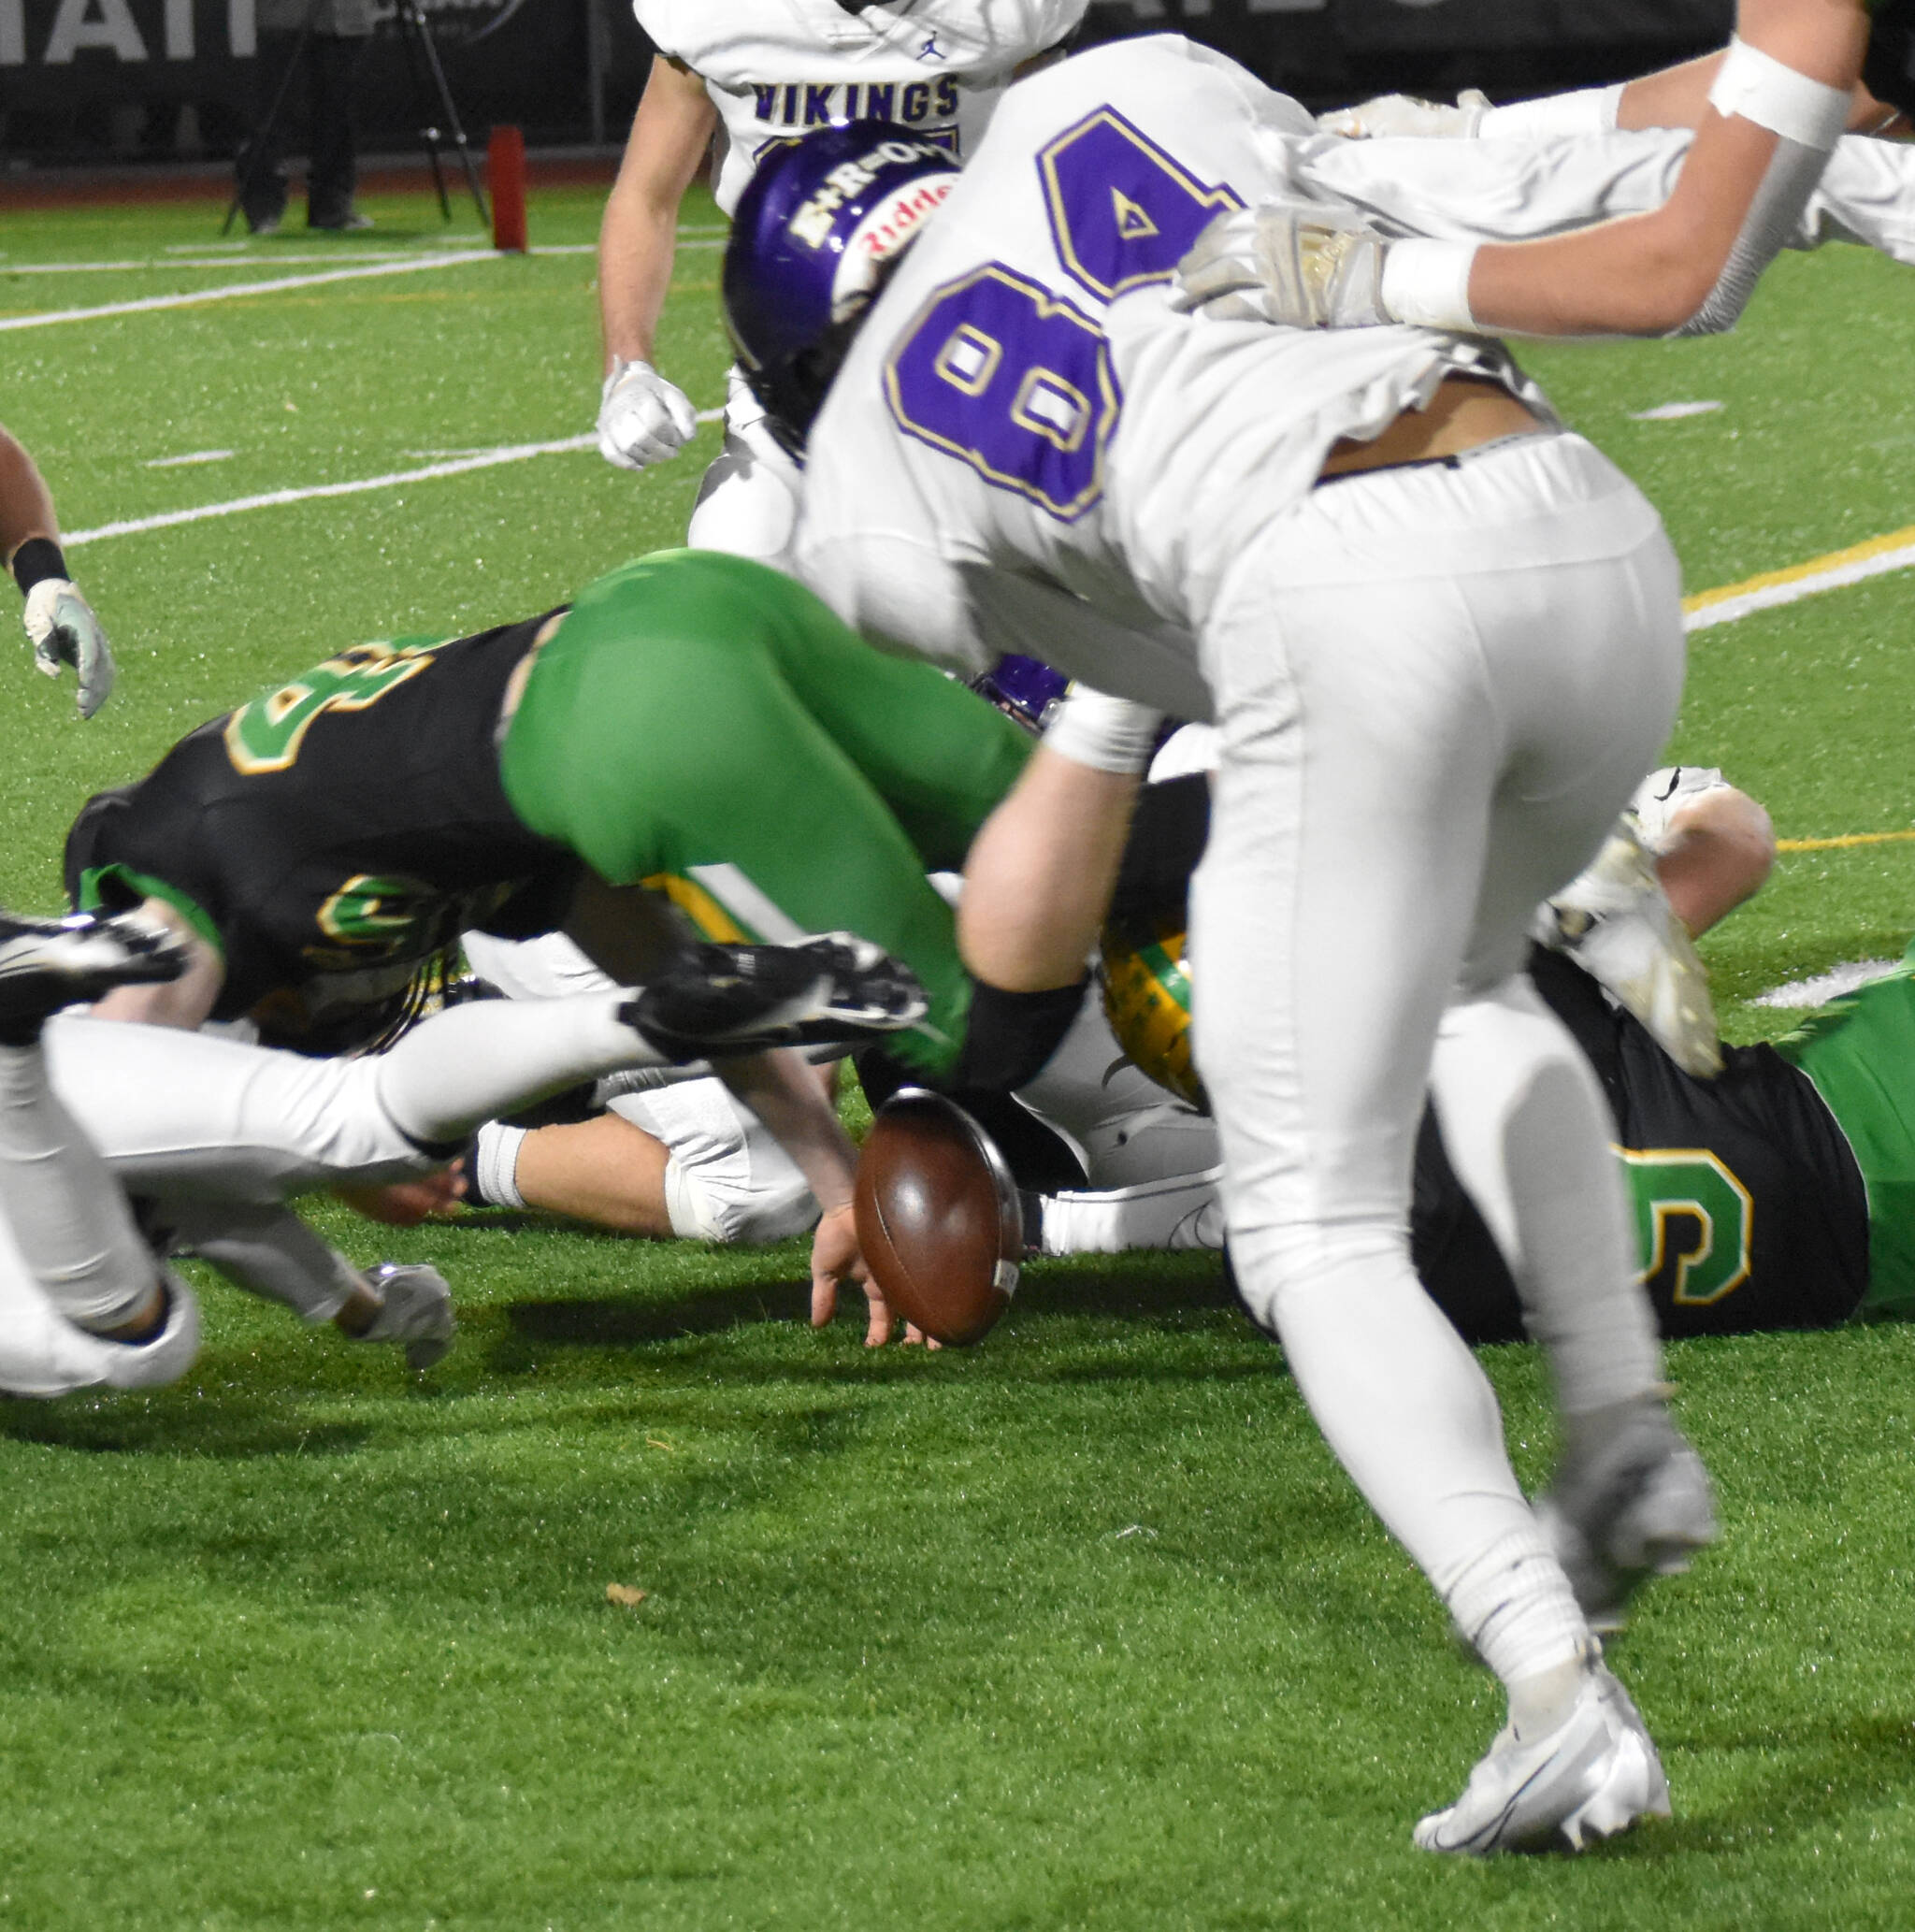 North Kitsap took a 3-0 lead after recovering the opening kick fumble.